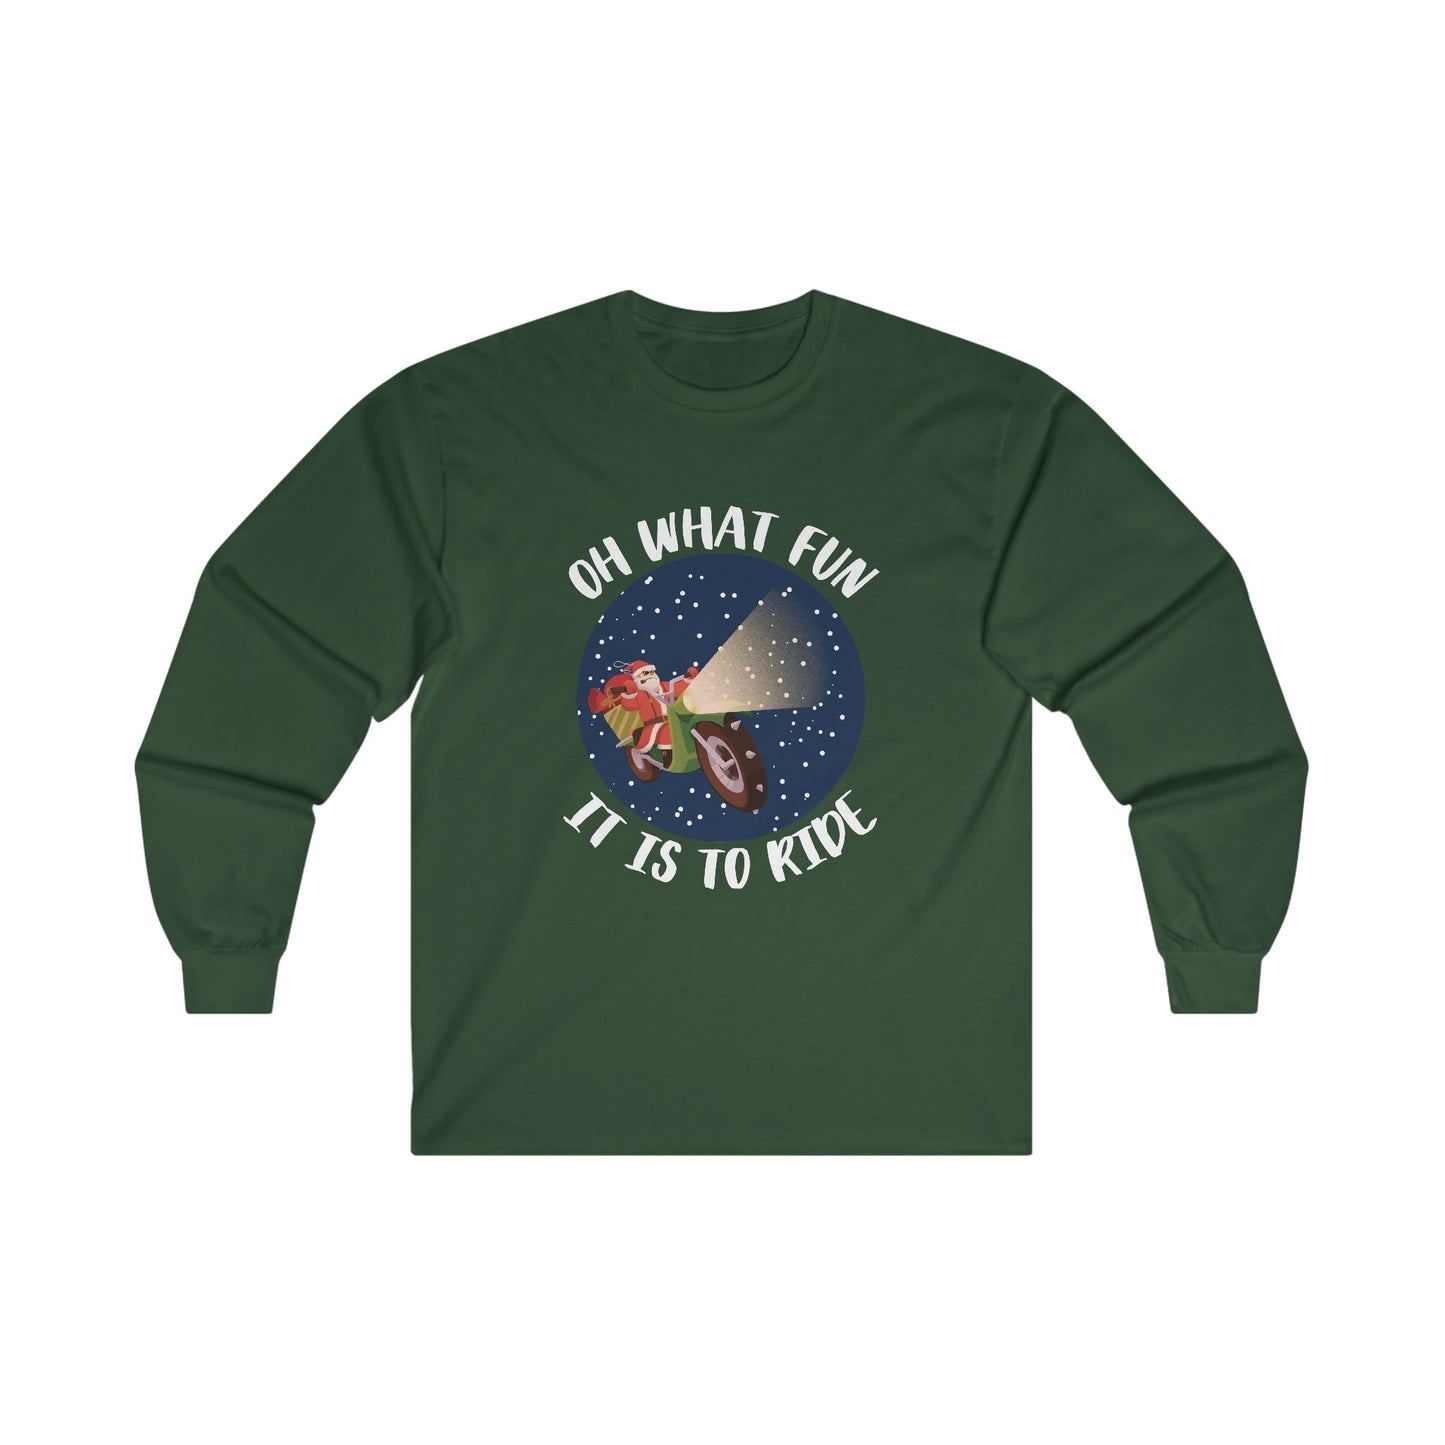 Christmas Long Sleeve T-Shirt - Oh What Fun It Is To Ride - Mens and Boys Christmas Shirts - Youth and Adult Christmas Long Sleeve TShirts Long Sleeve T-Shirts Graphic Avenue Forrest Green Adult Small 